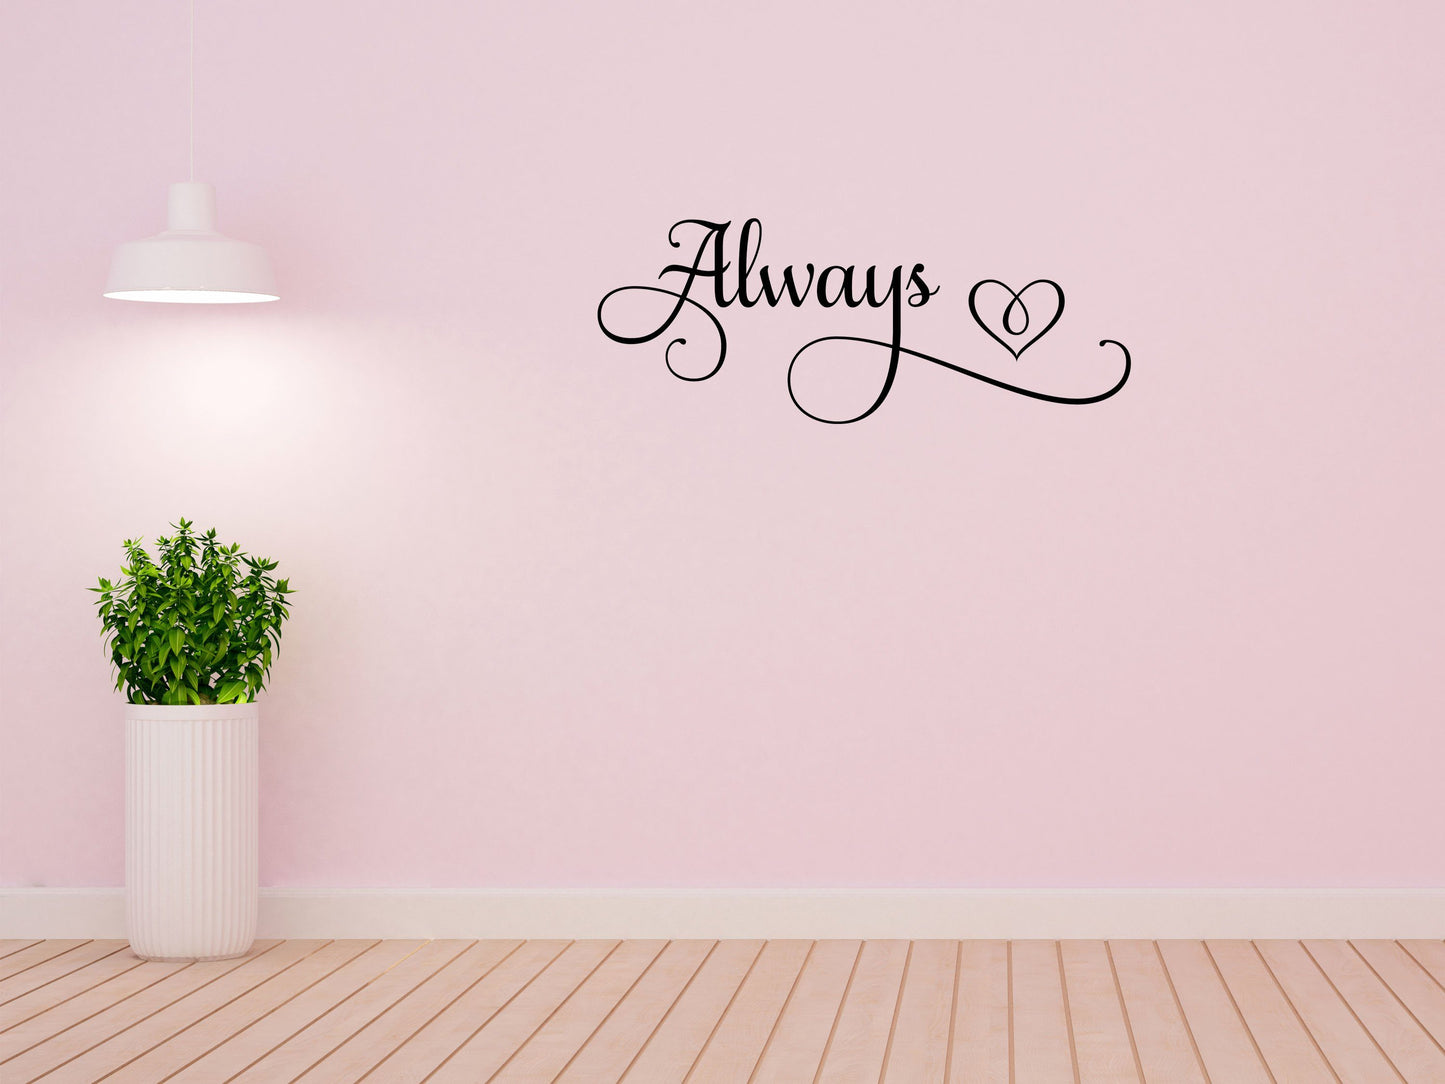 Always Sticker For The Wall Sticker - Inspirational Wall Decals Vinyl Wall Decal Done 